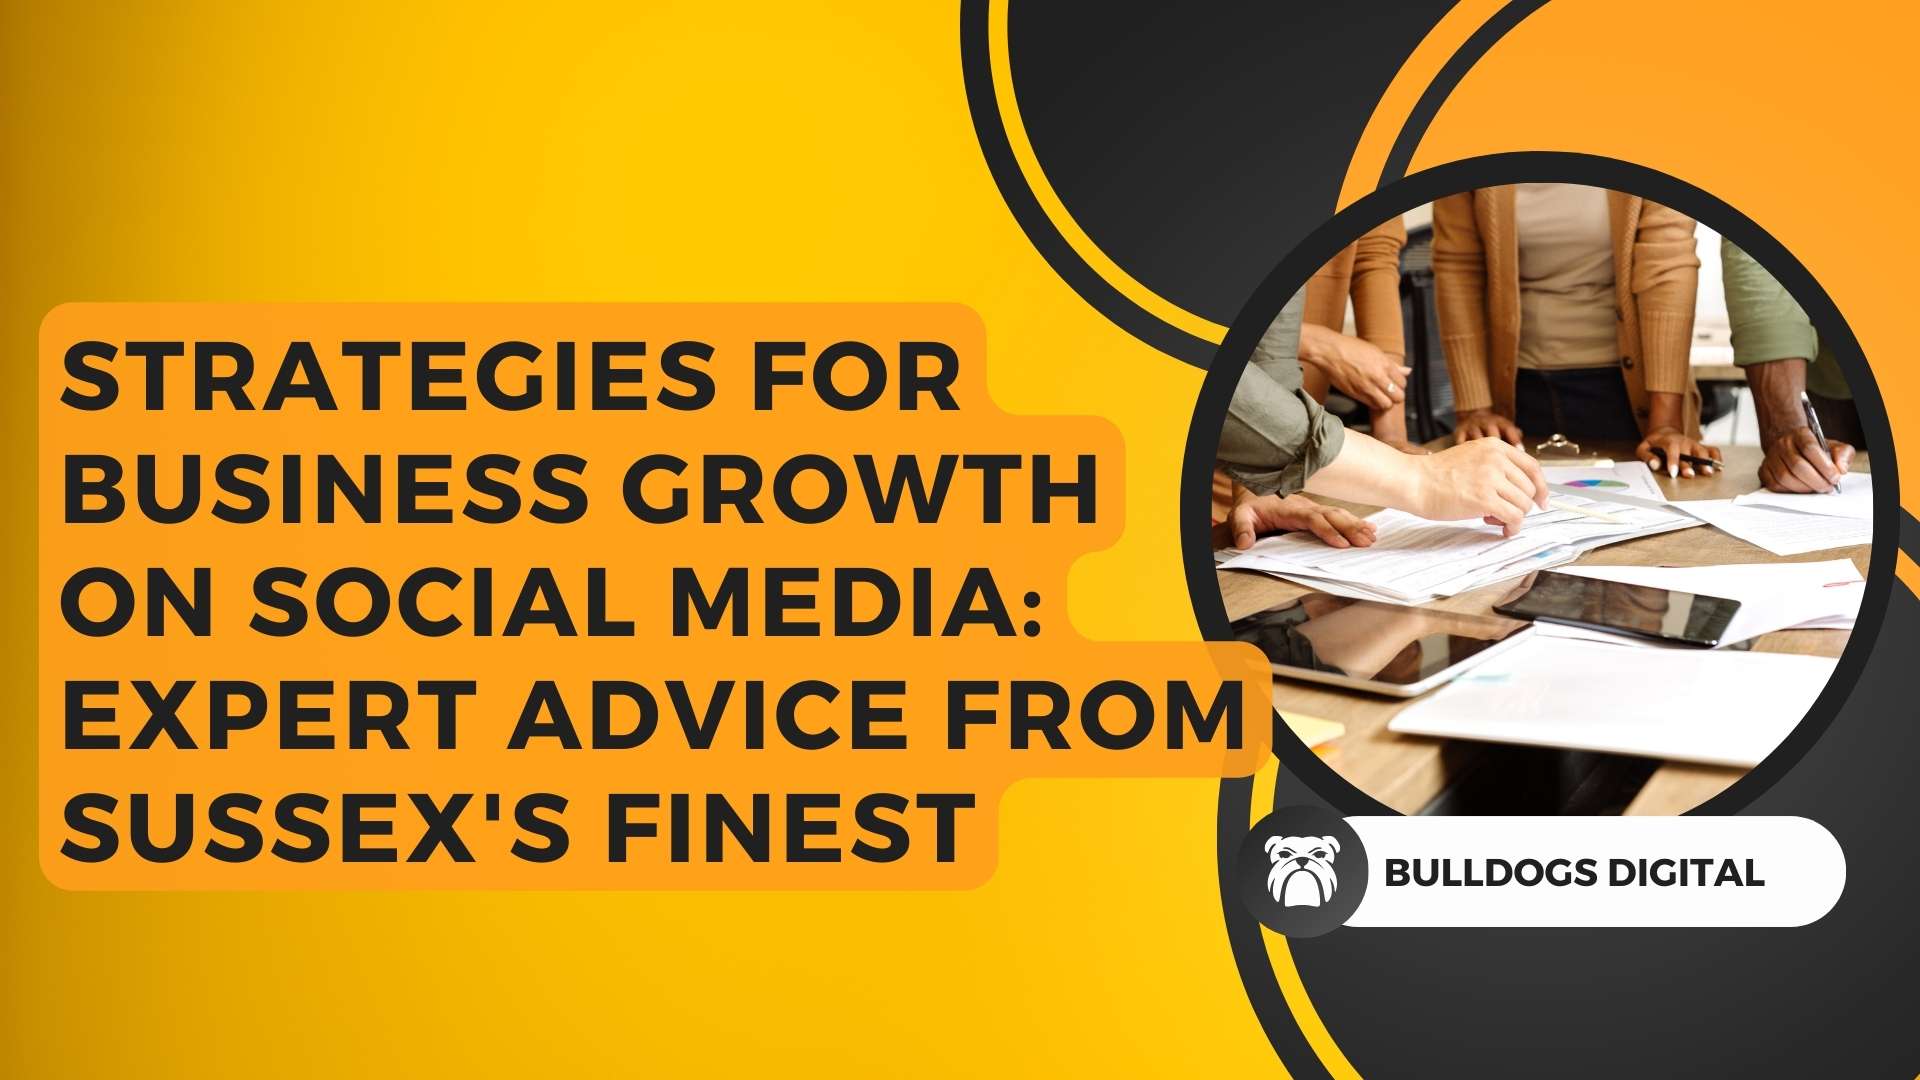 Strategies for Business Growth on Social Media: Expert Advice from Sussex's Finest Bulldogs Digital Website Design and Photography Sussex